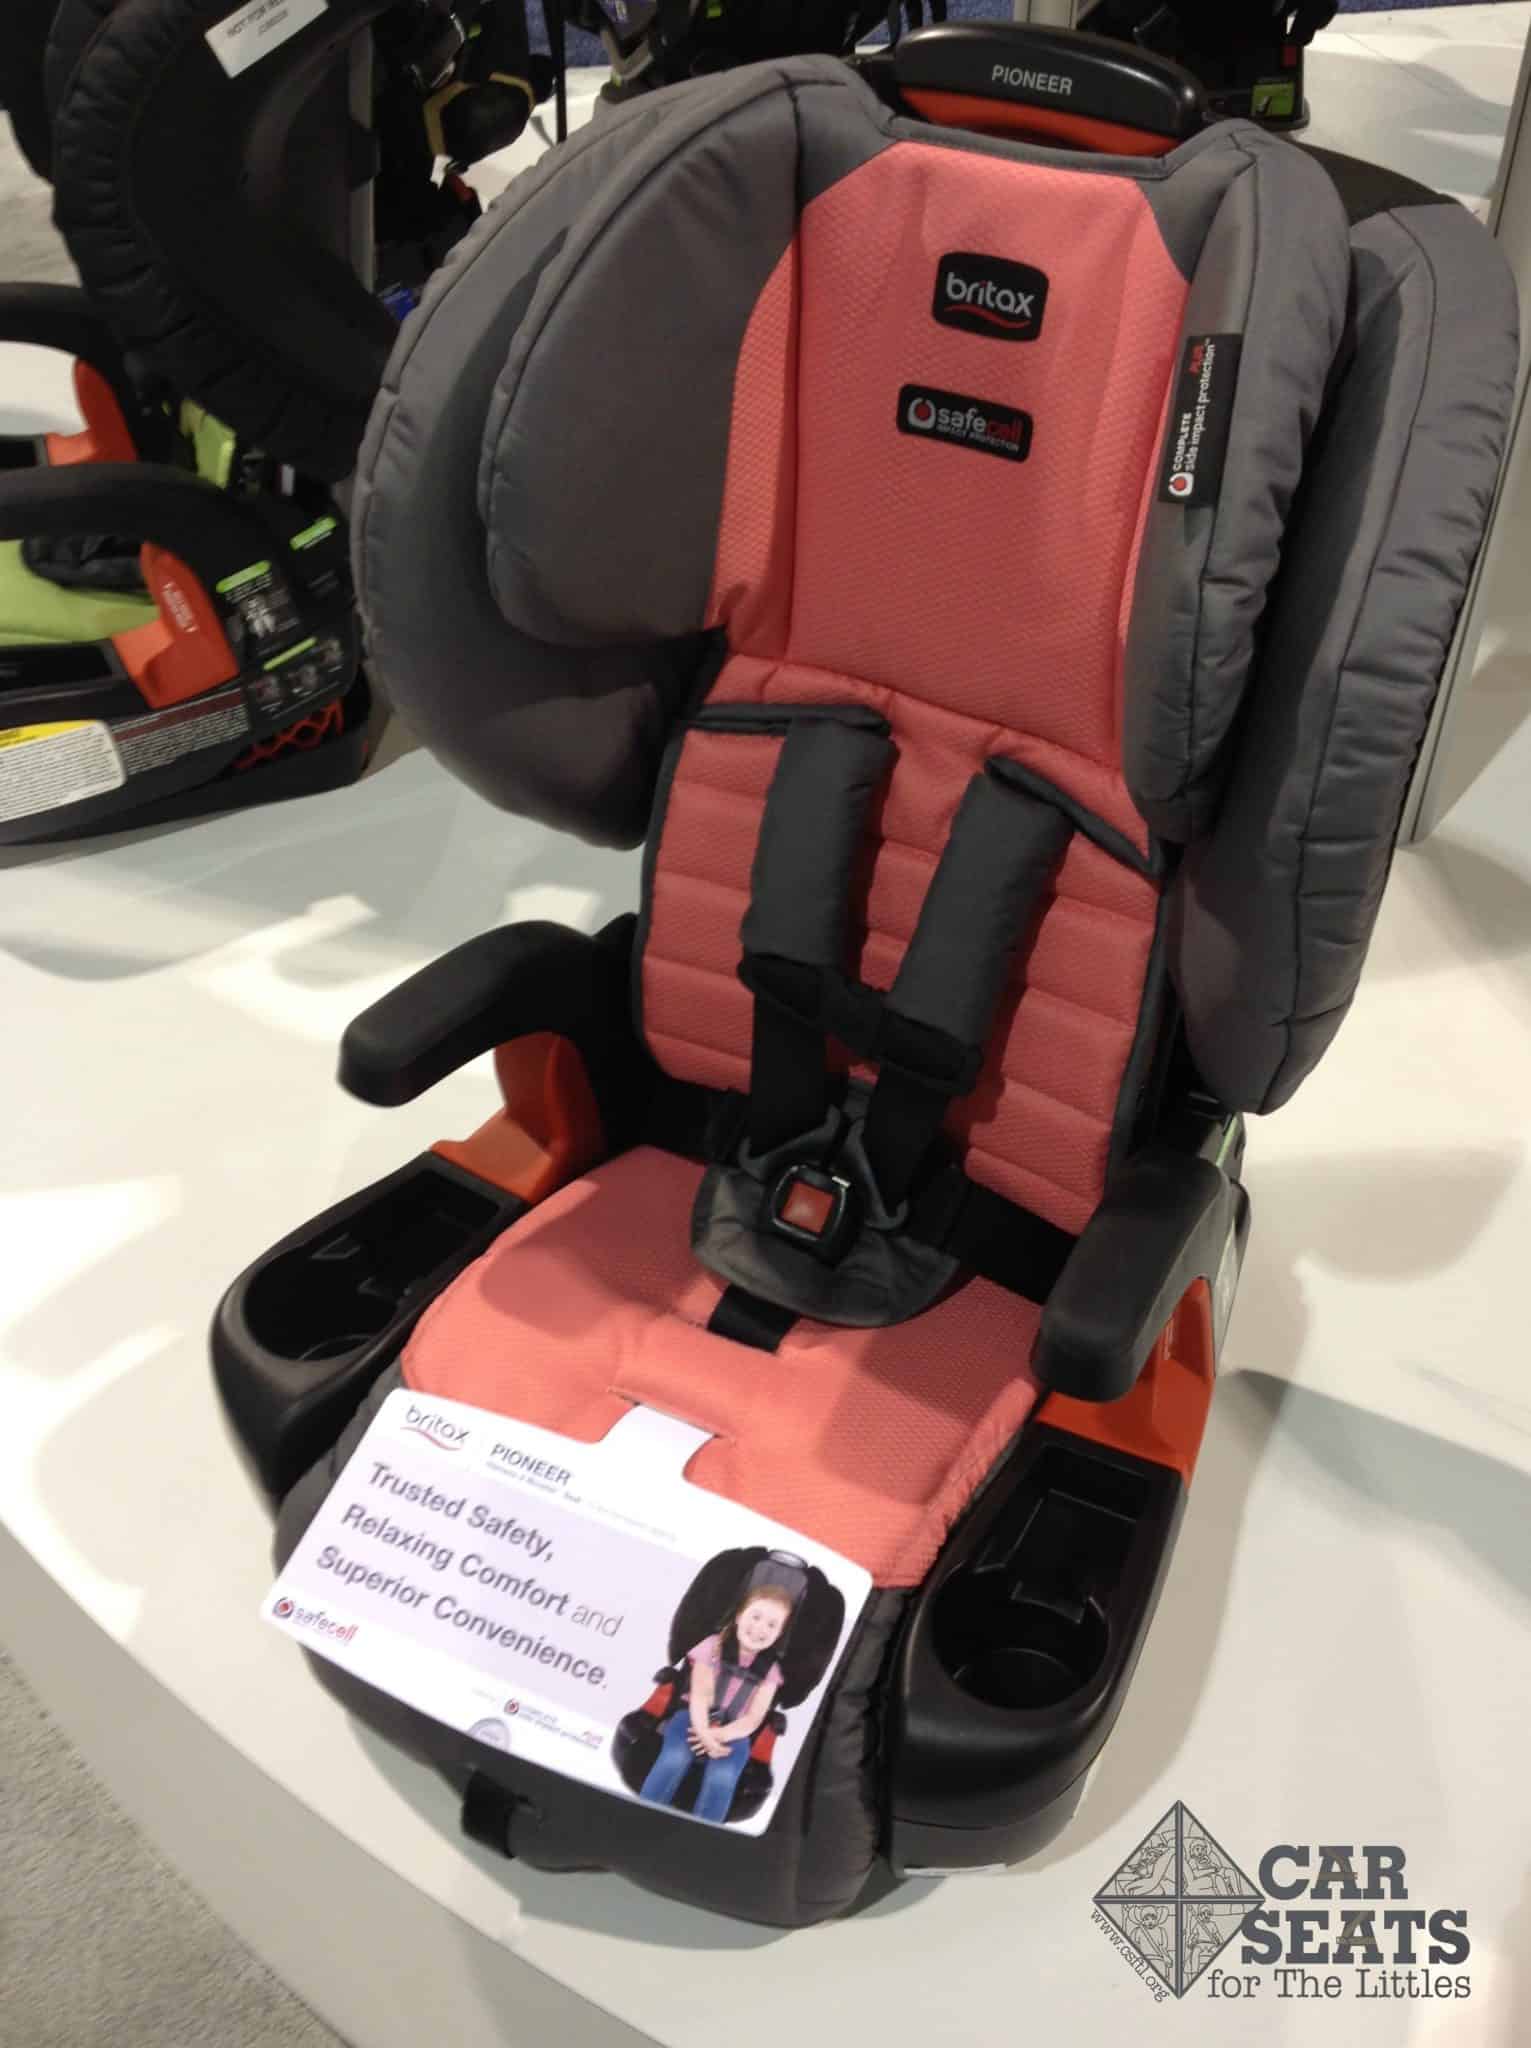 Britax Pioneer Review Car Seats For, Britax Frontier 90 Car Seat Expiration